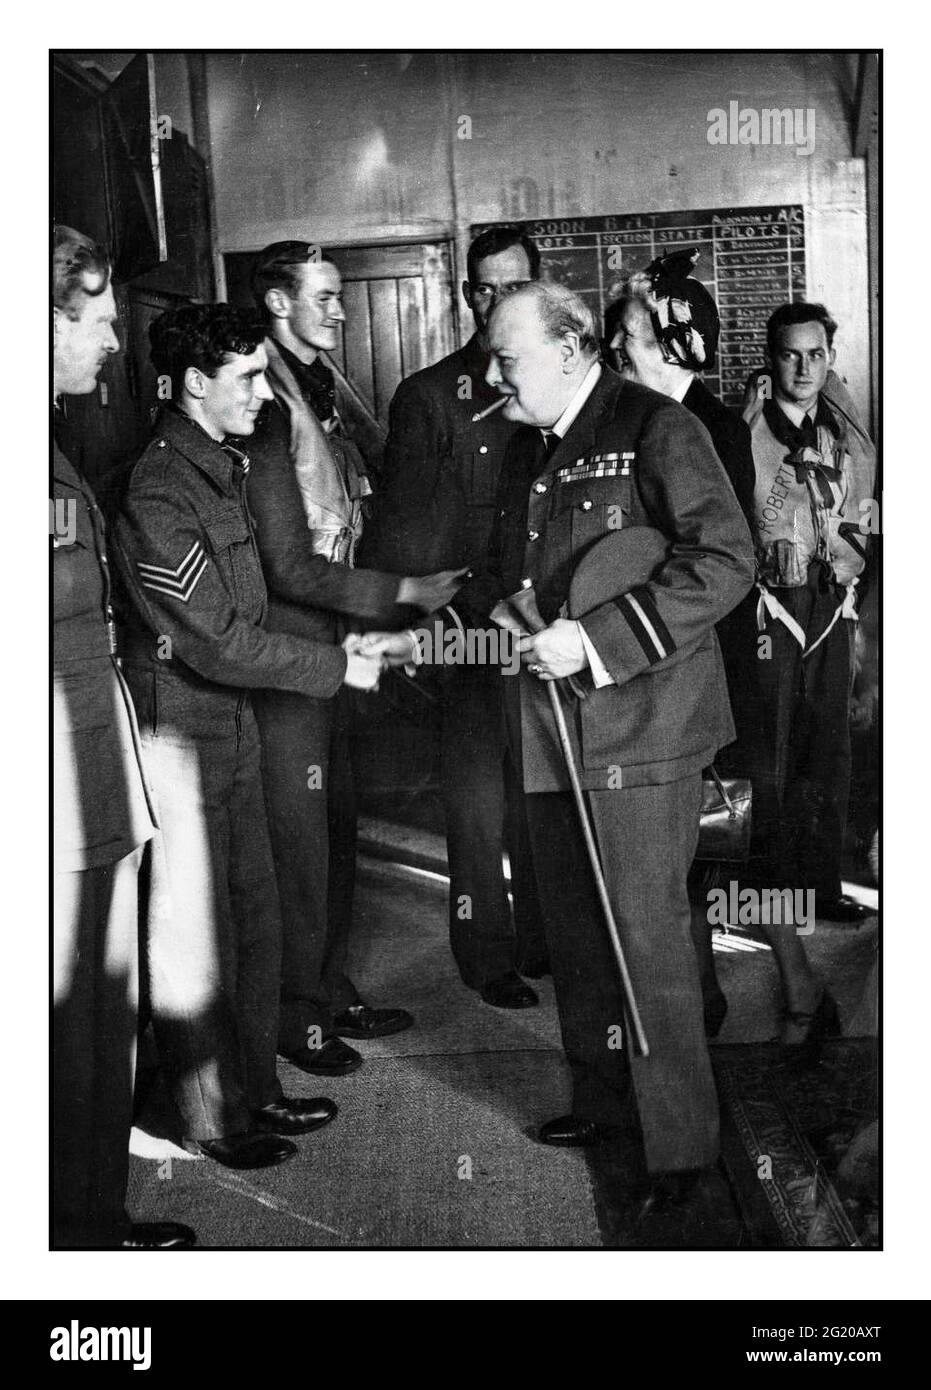 Morale boosting visit during the Battle of Britain by British Prime Minister Winston Churchill wearing the uniform of Air Commodore of the Royal Air Force visits 615 Fighter Squadron of which he is honorary air commodore. Here he is pictured shaking hands with a sergeant pilot during his introductions to the Royal Airforce pilots in their mess. 29th September 1941. Stock Photo